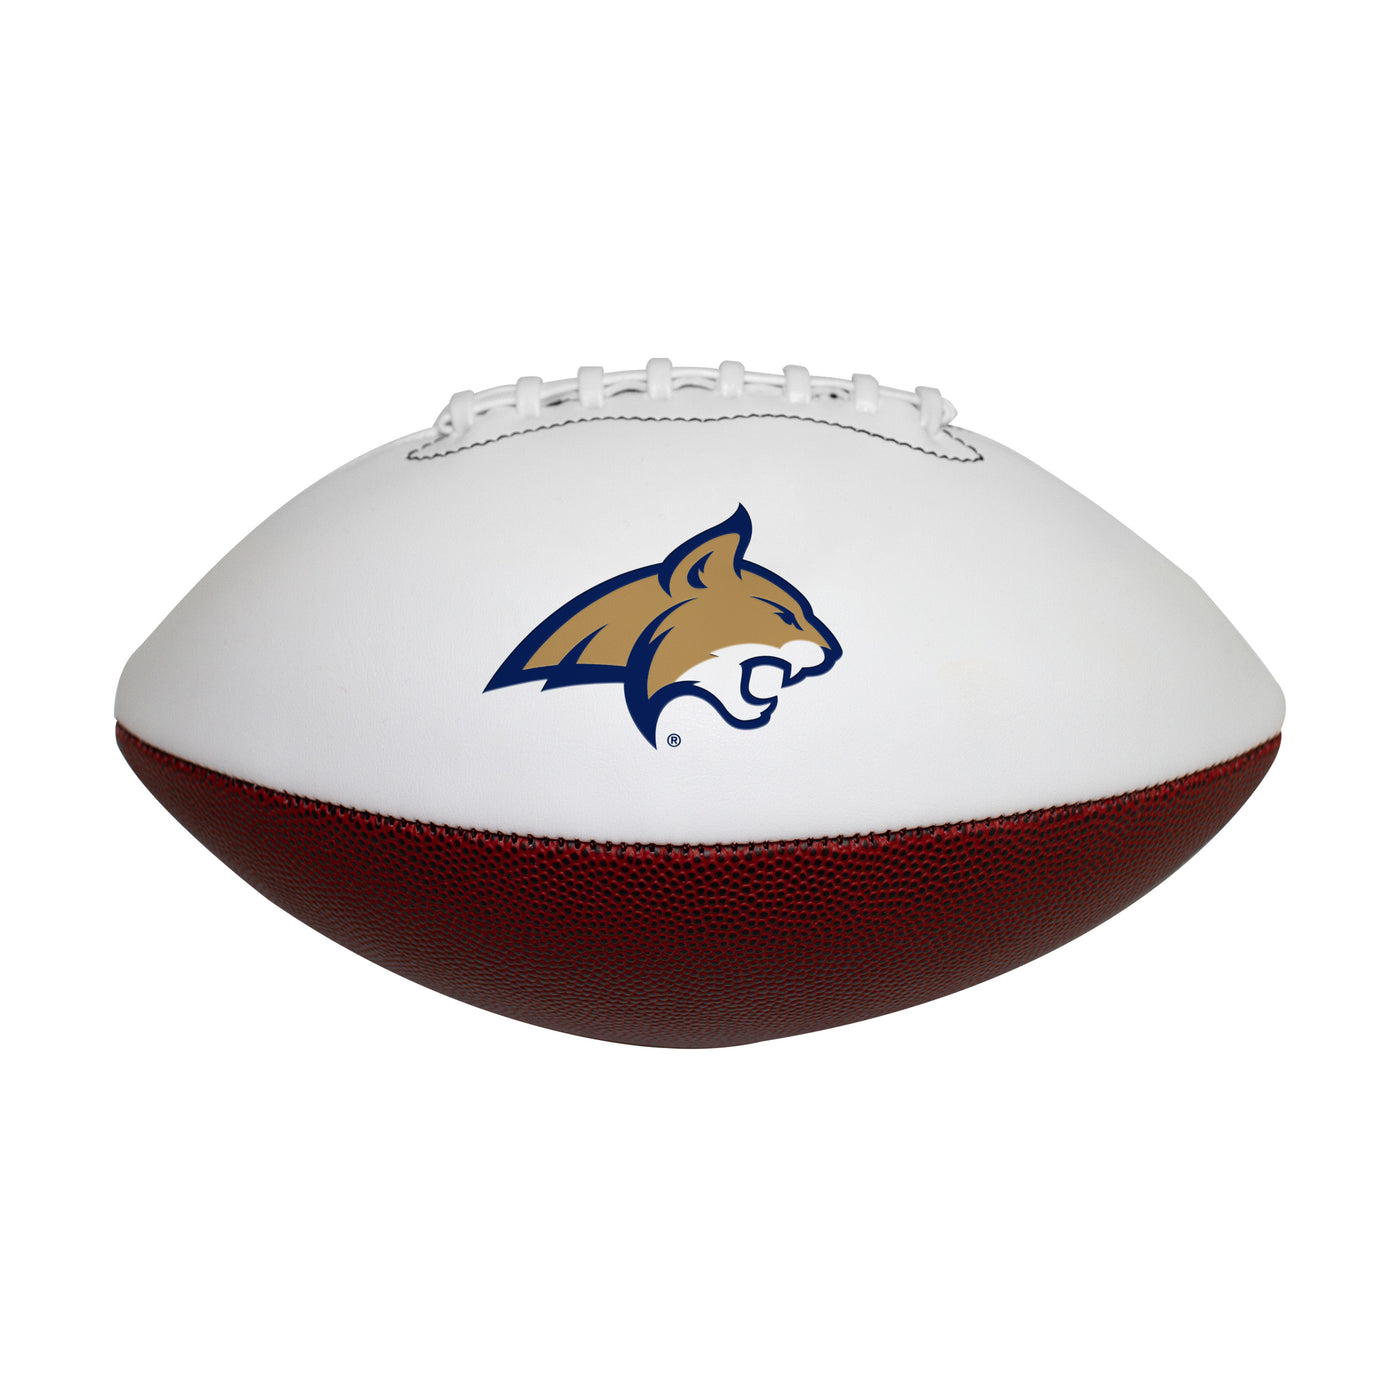 MT State Official-Size Autograph Football